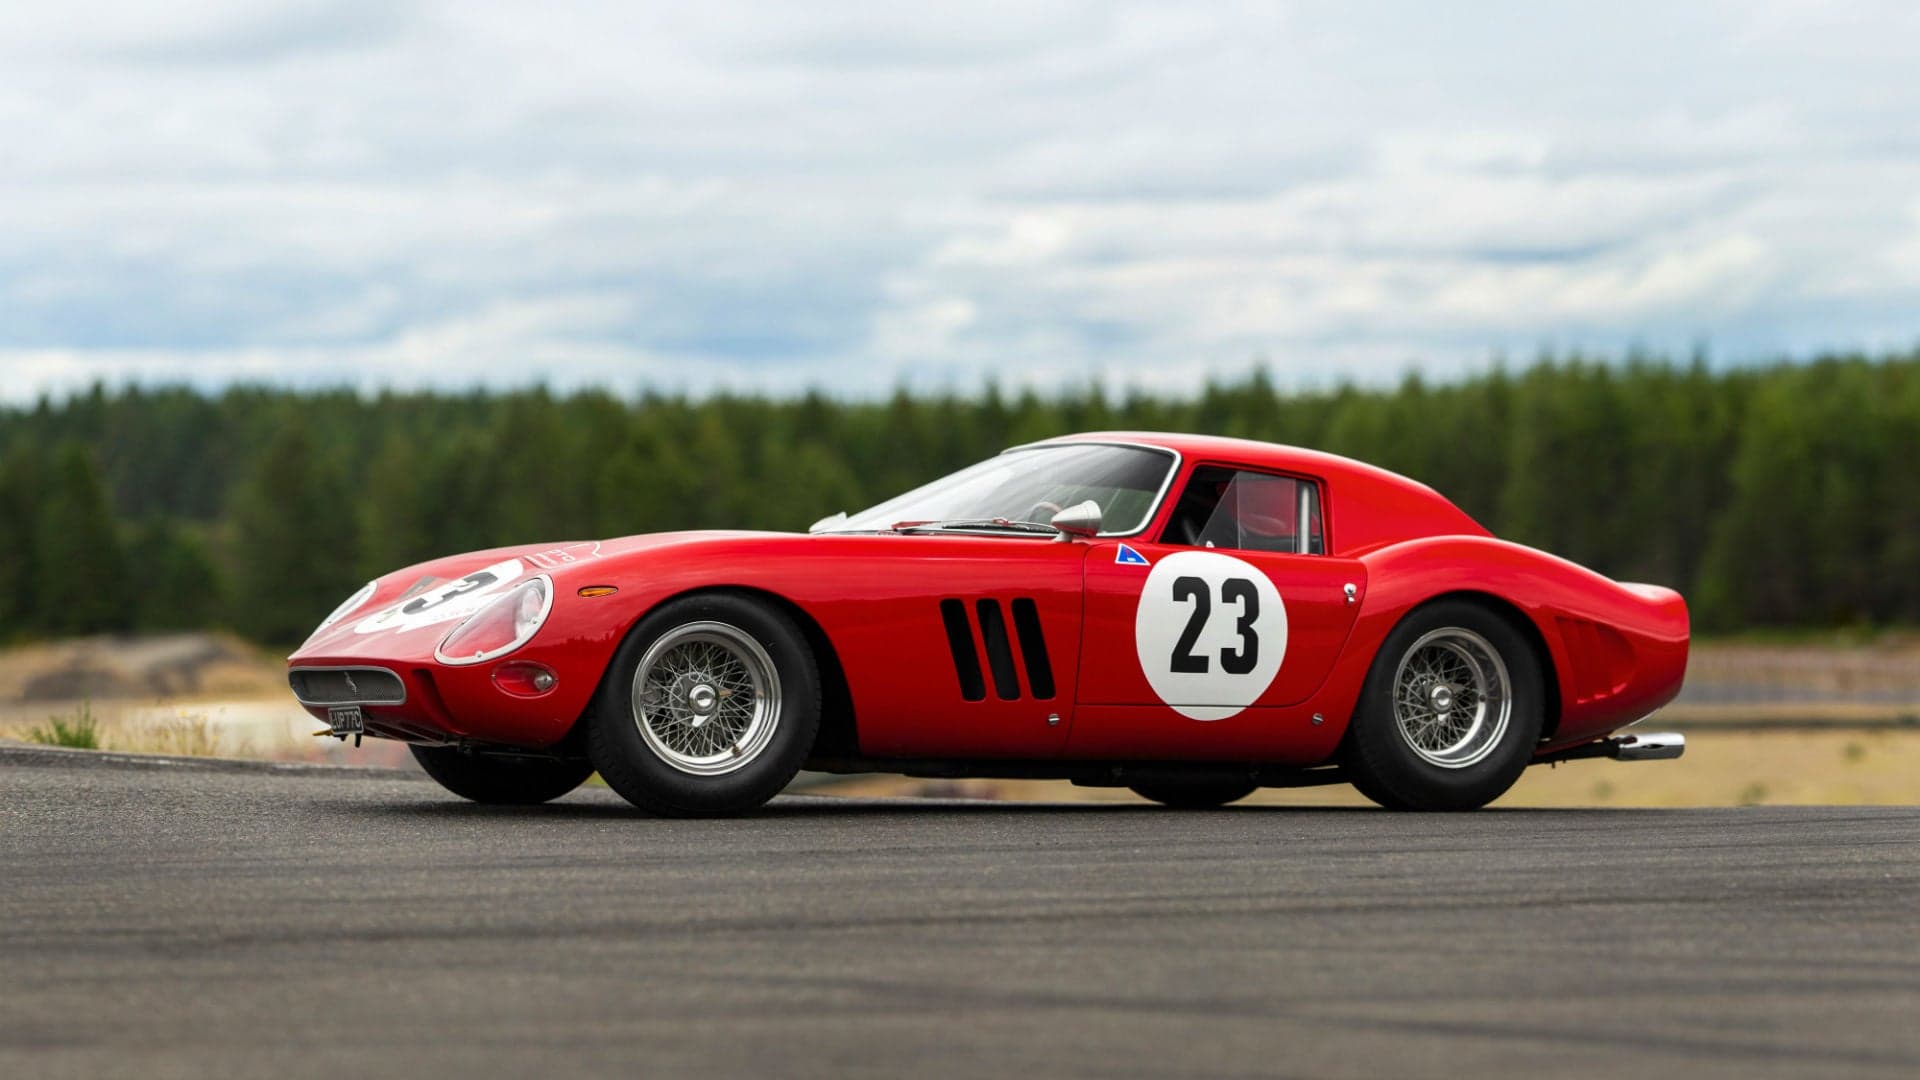 $45M Ferrari 250 GTO May Be Most Expensive Car Ever Sold at Public Auction